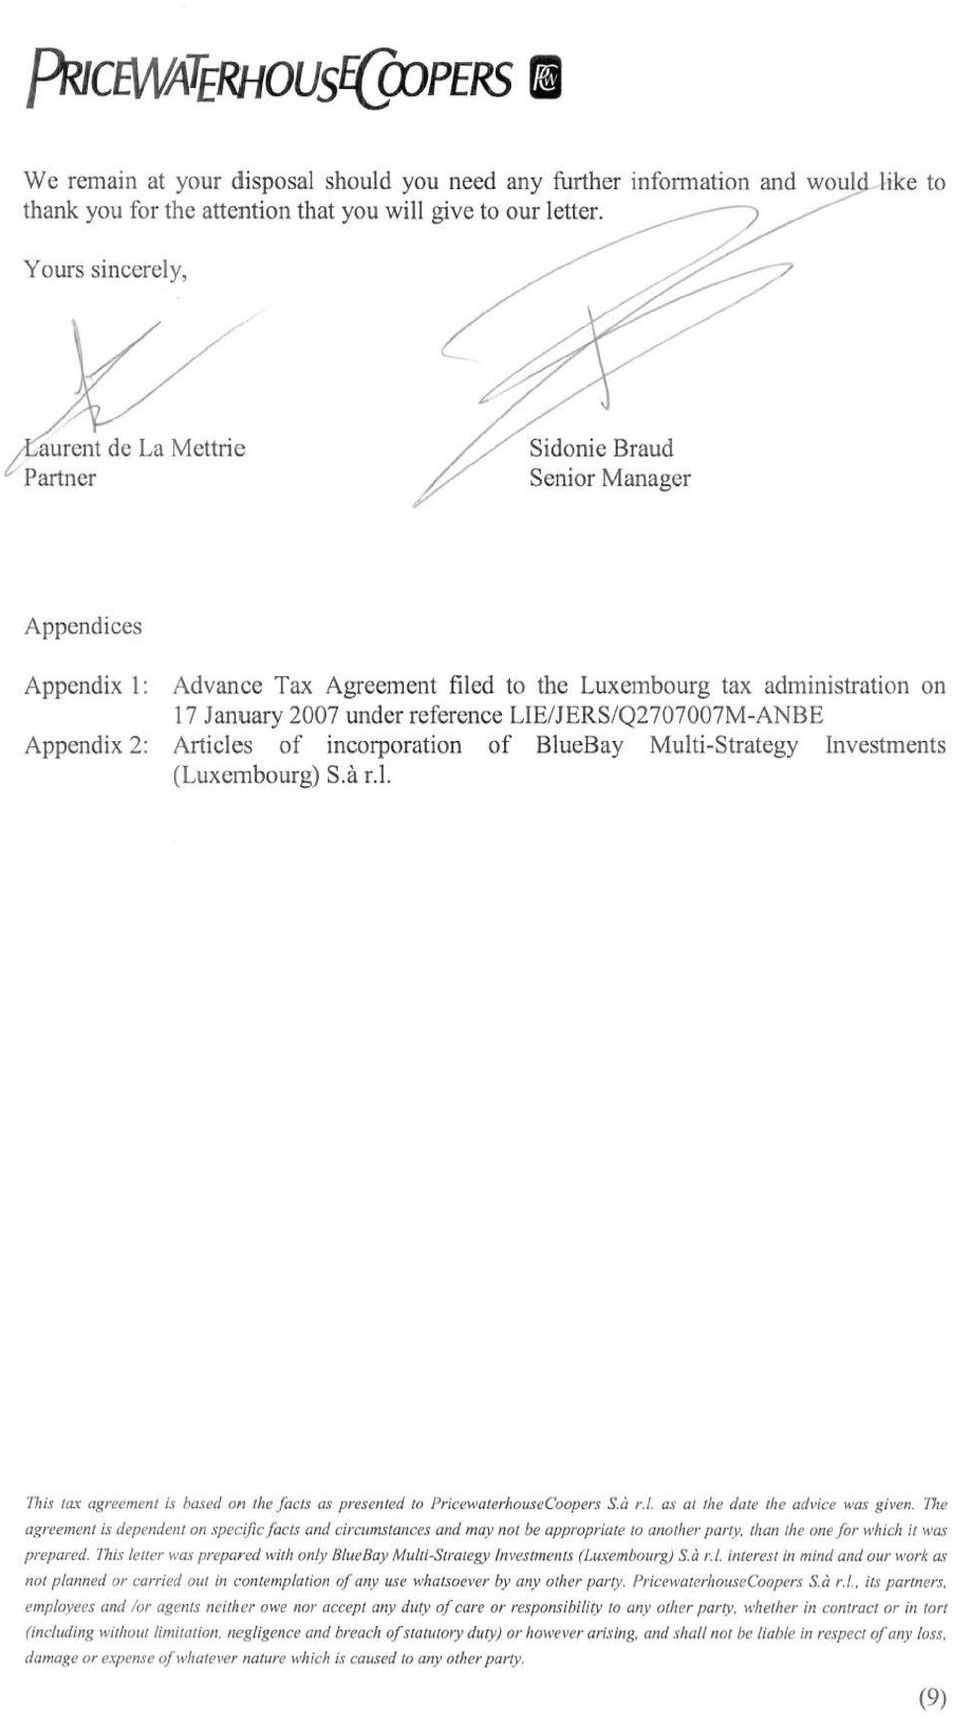 Appendix 2: Articles of incorporation of BlueBay Multi-Strategy Investments (Luxembourg) S.a r.l. 171is ULr agreement is based on the facts as presented 10 PricewaterhouseCoopers S.a r.!. as at the date the advice was given.